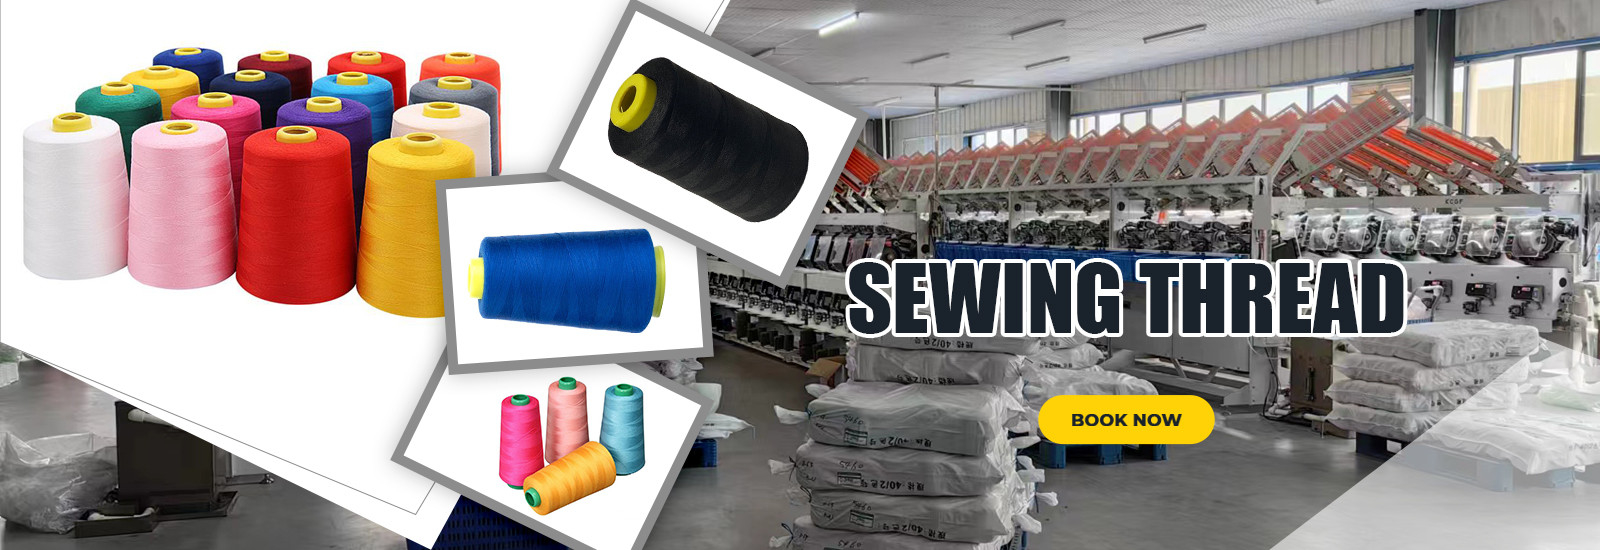 quality 100 Spun Polyester Sewing Thread factory